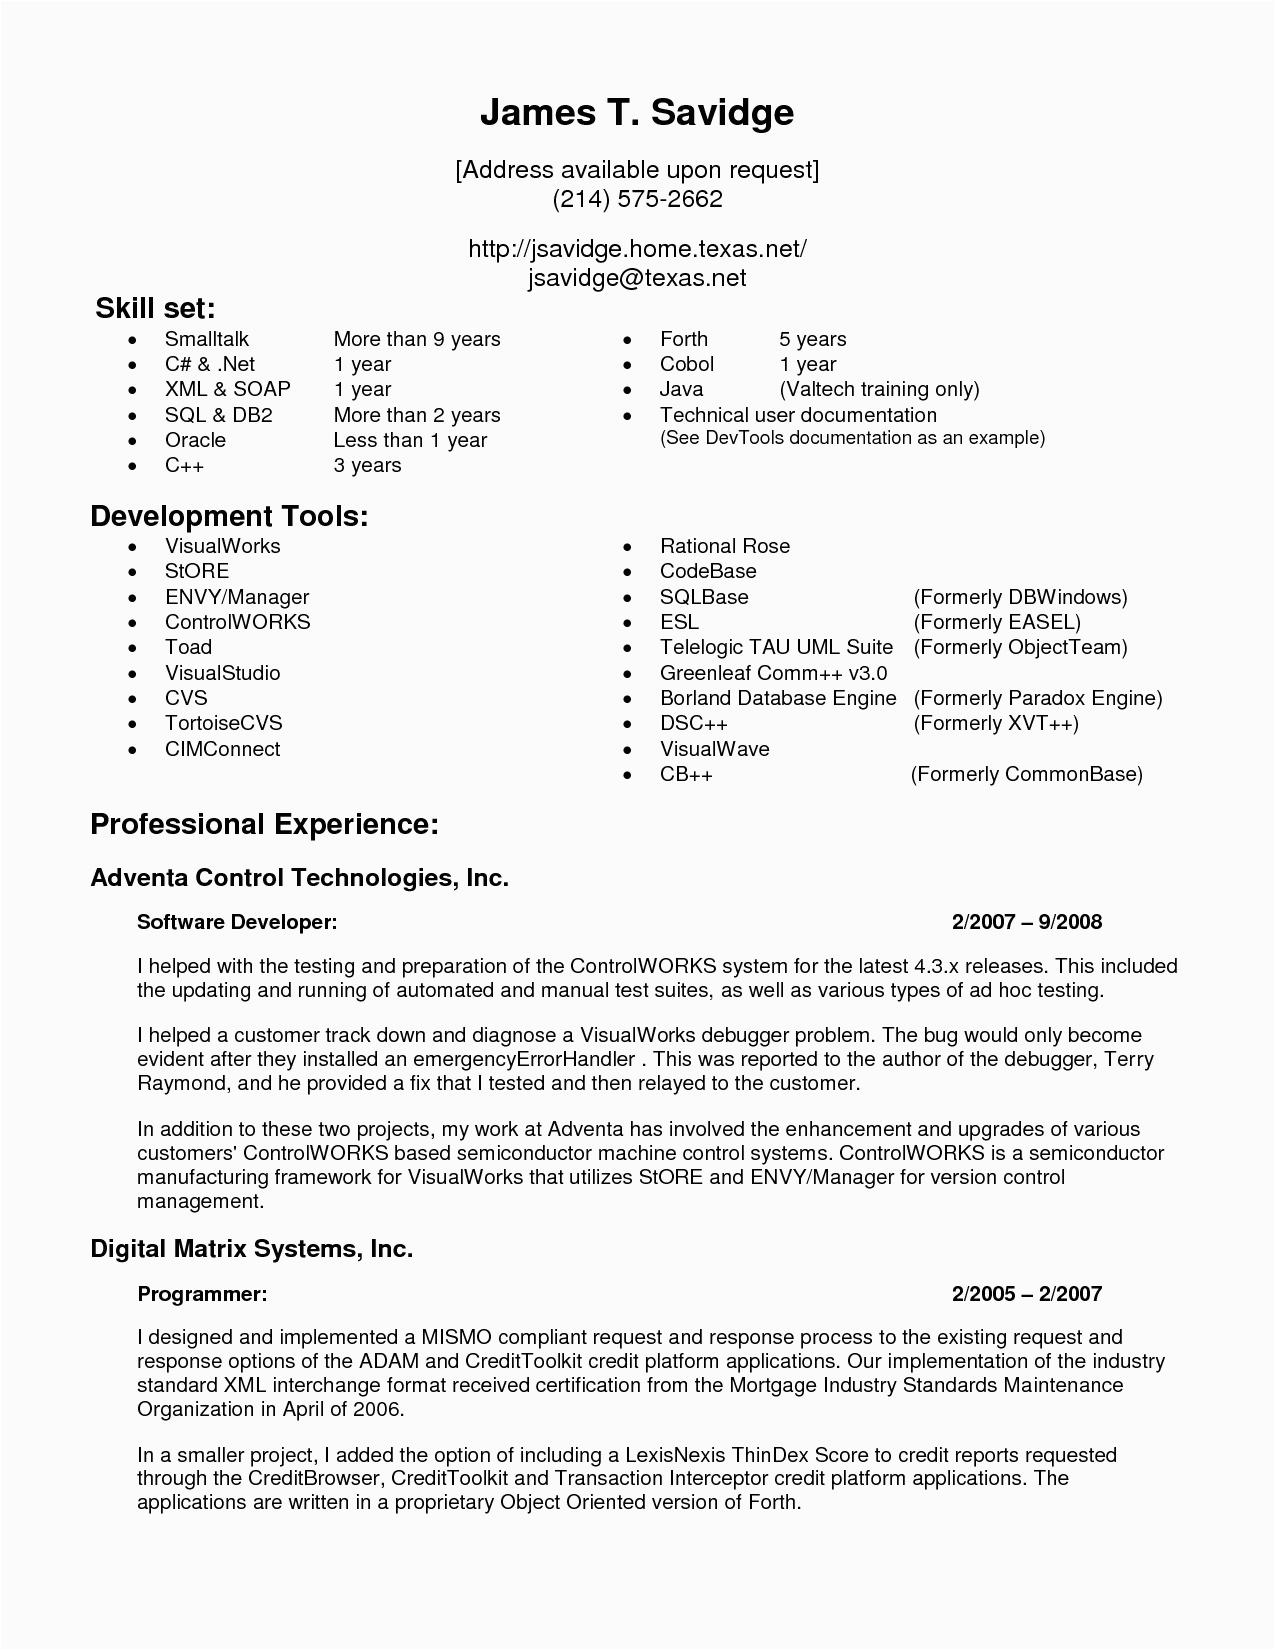 Sample Resume for 5 Years Experience In Mainframe 5 Years Experience Resume format Resume Templates